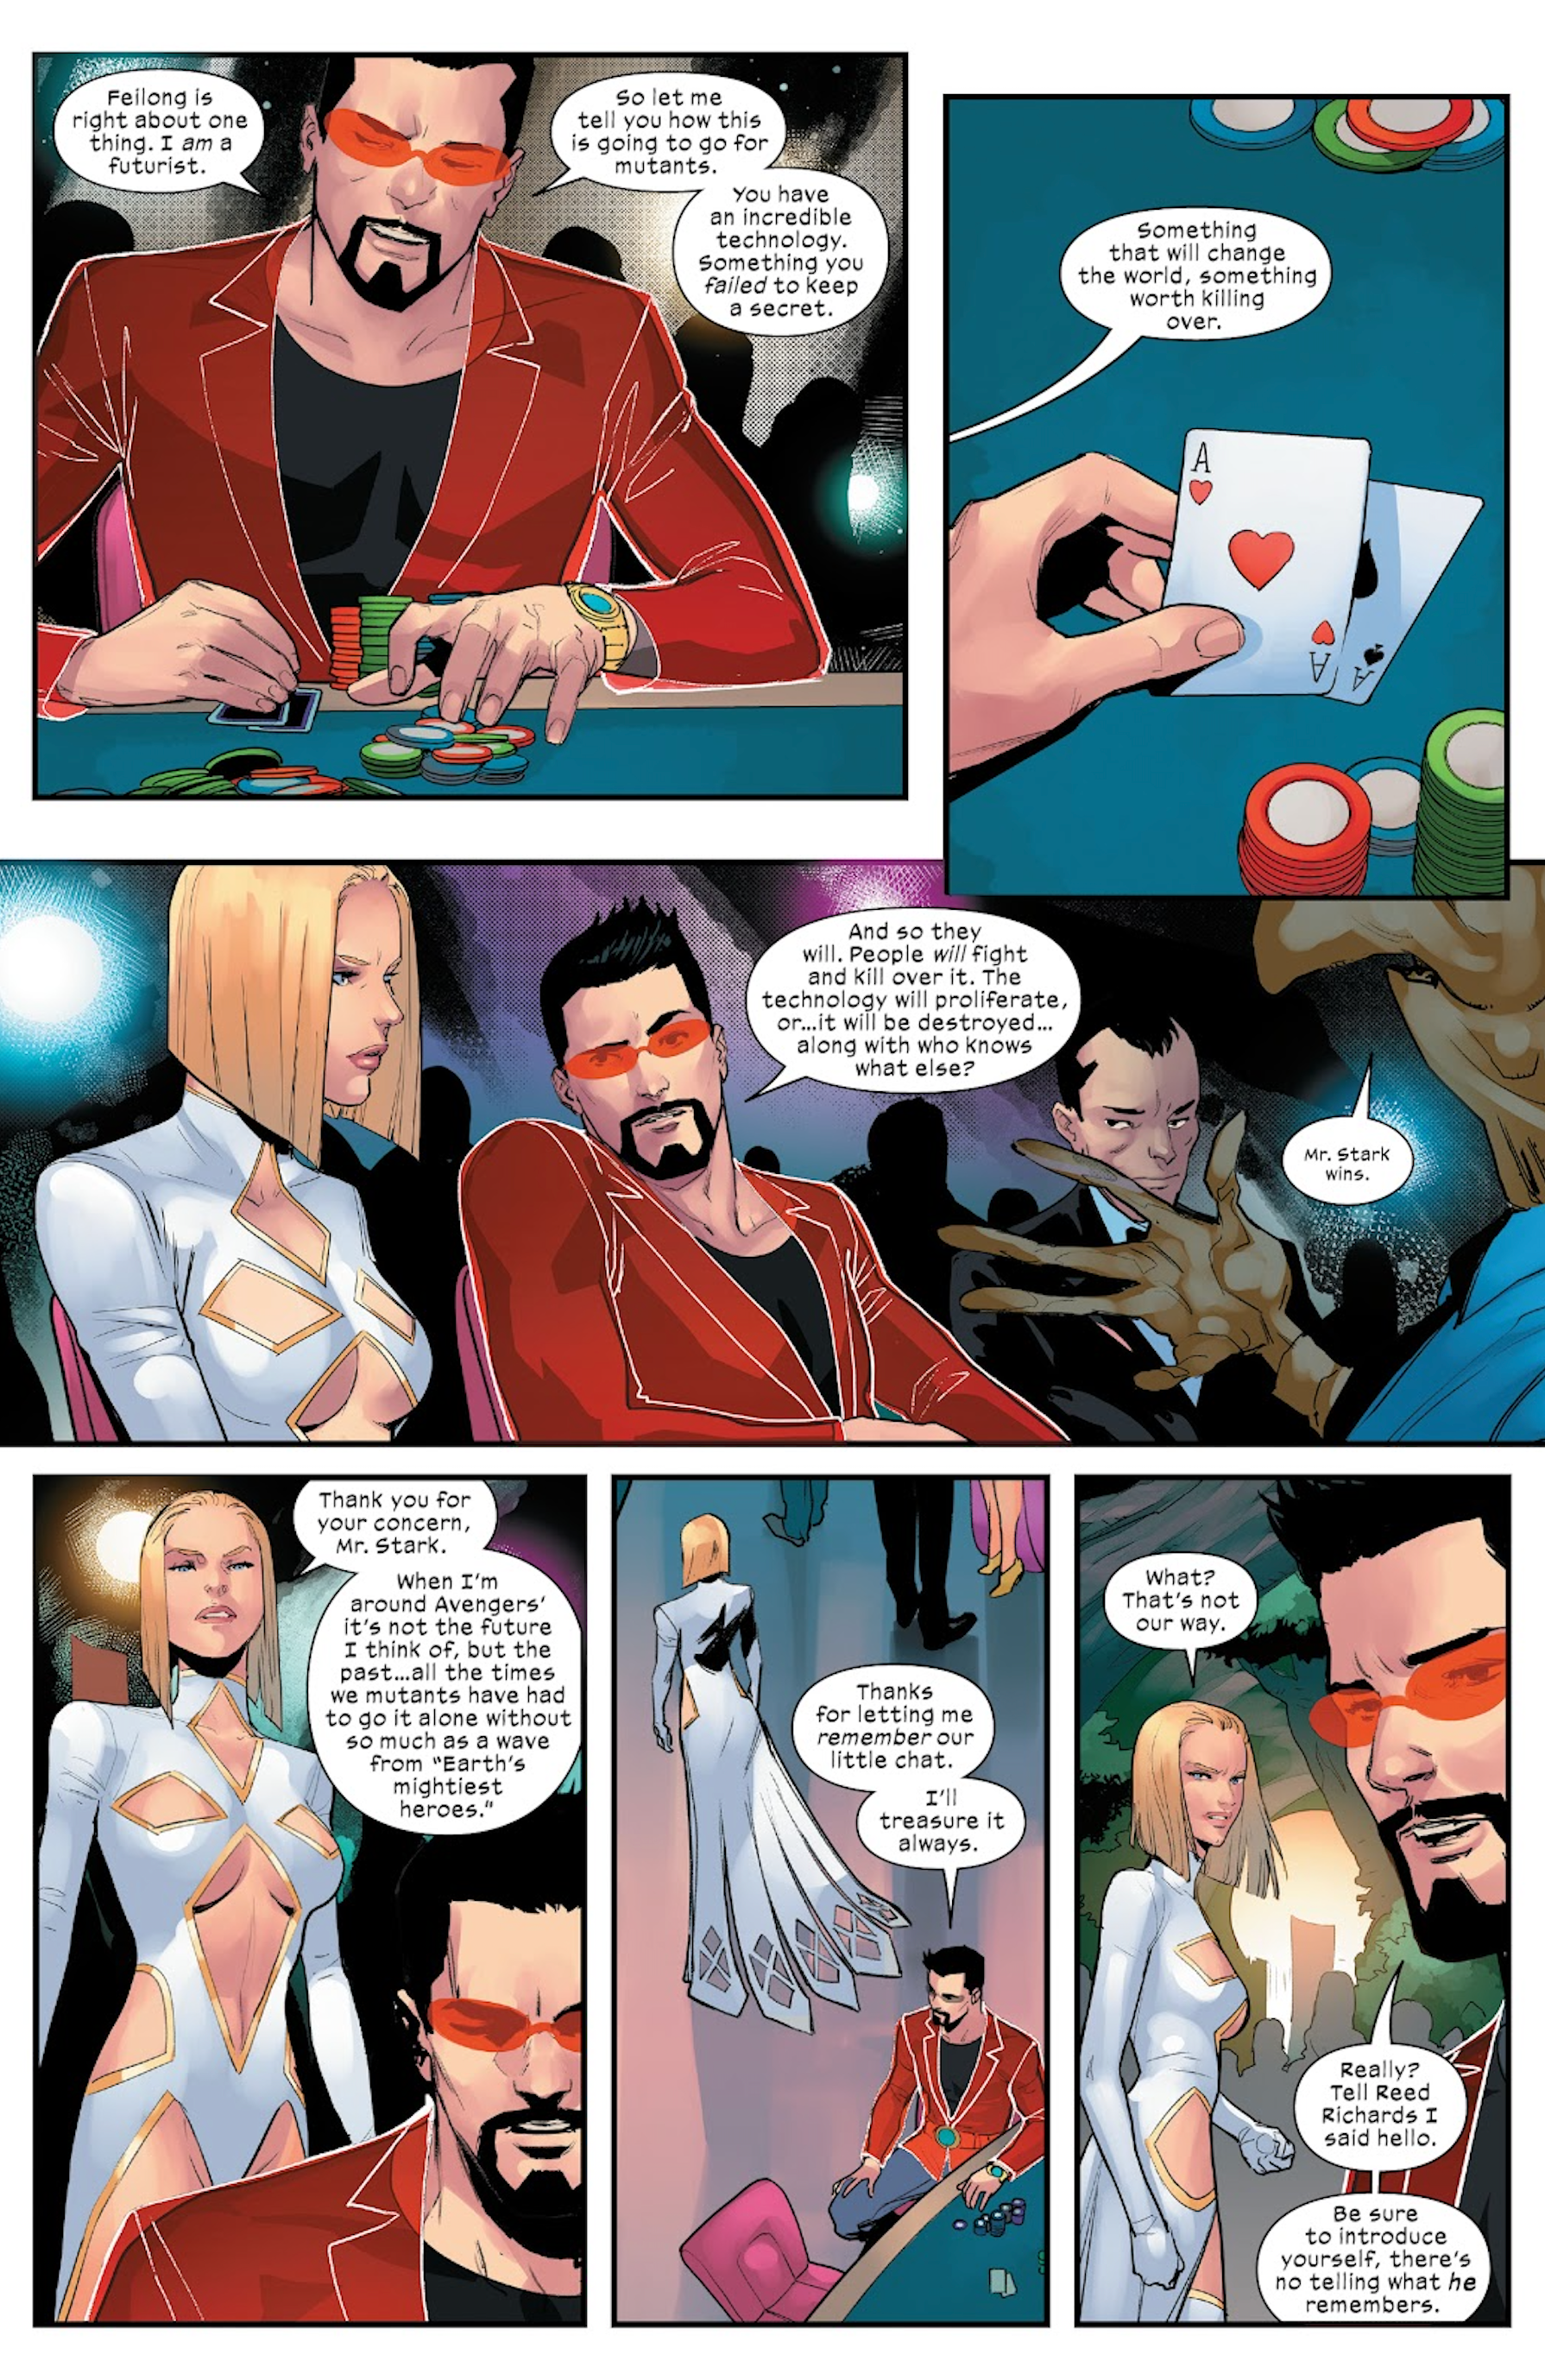 Iron Man and Emma Frost at the Hellfire Gala